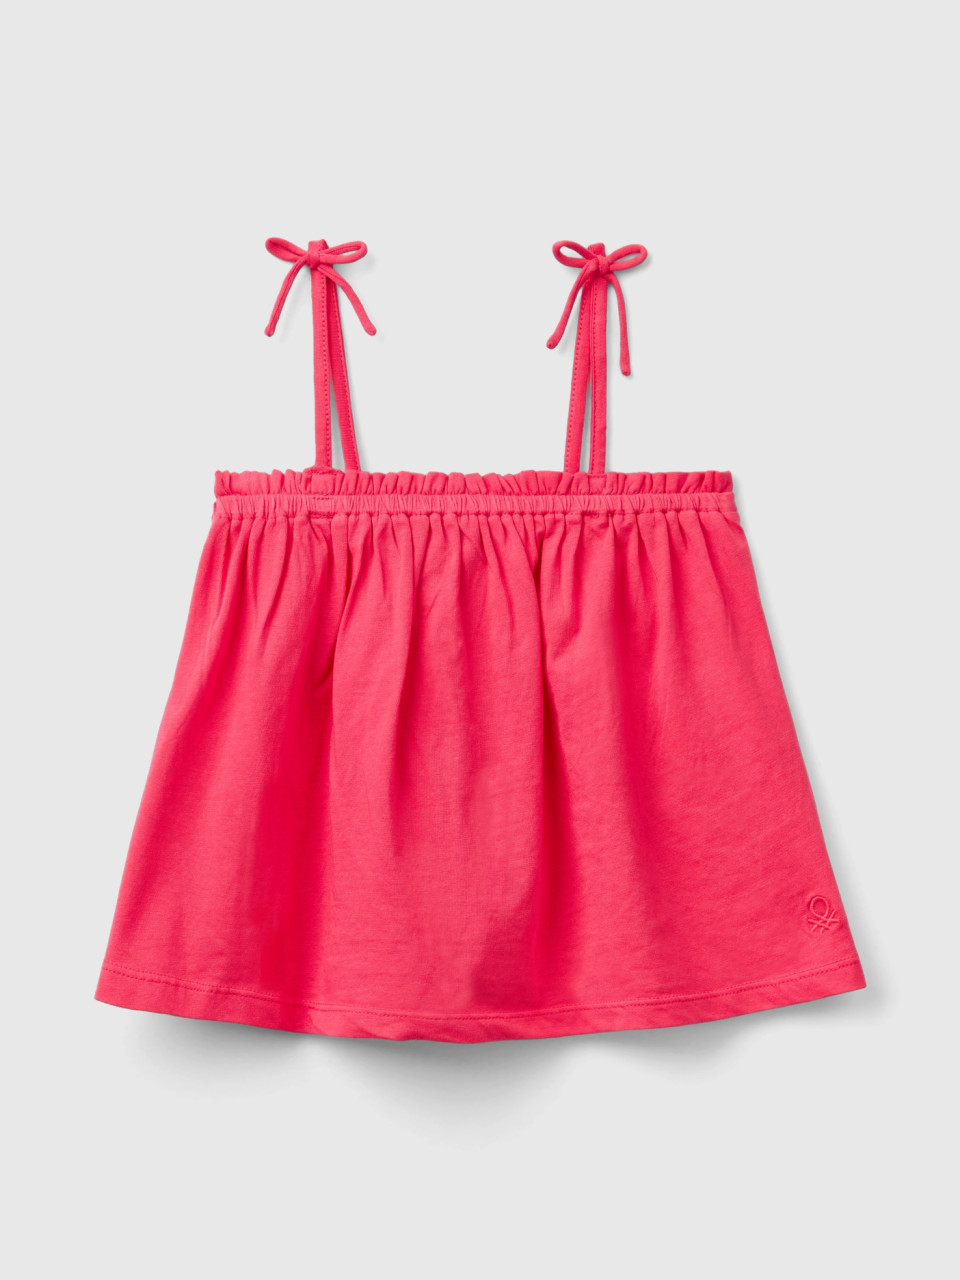 Benetton, Top With Broderie Anglaise Details, Fuchsia, Kids